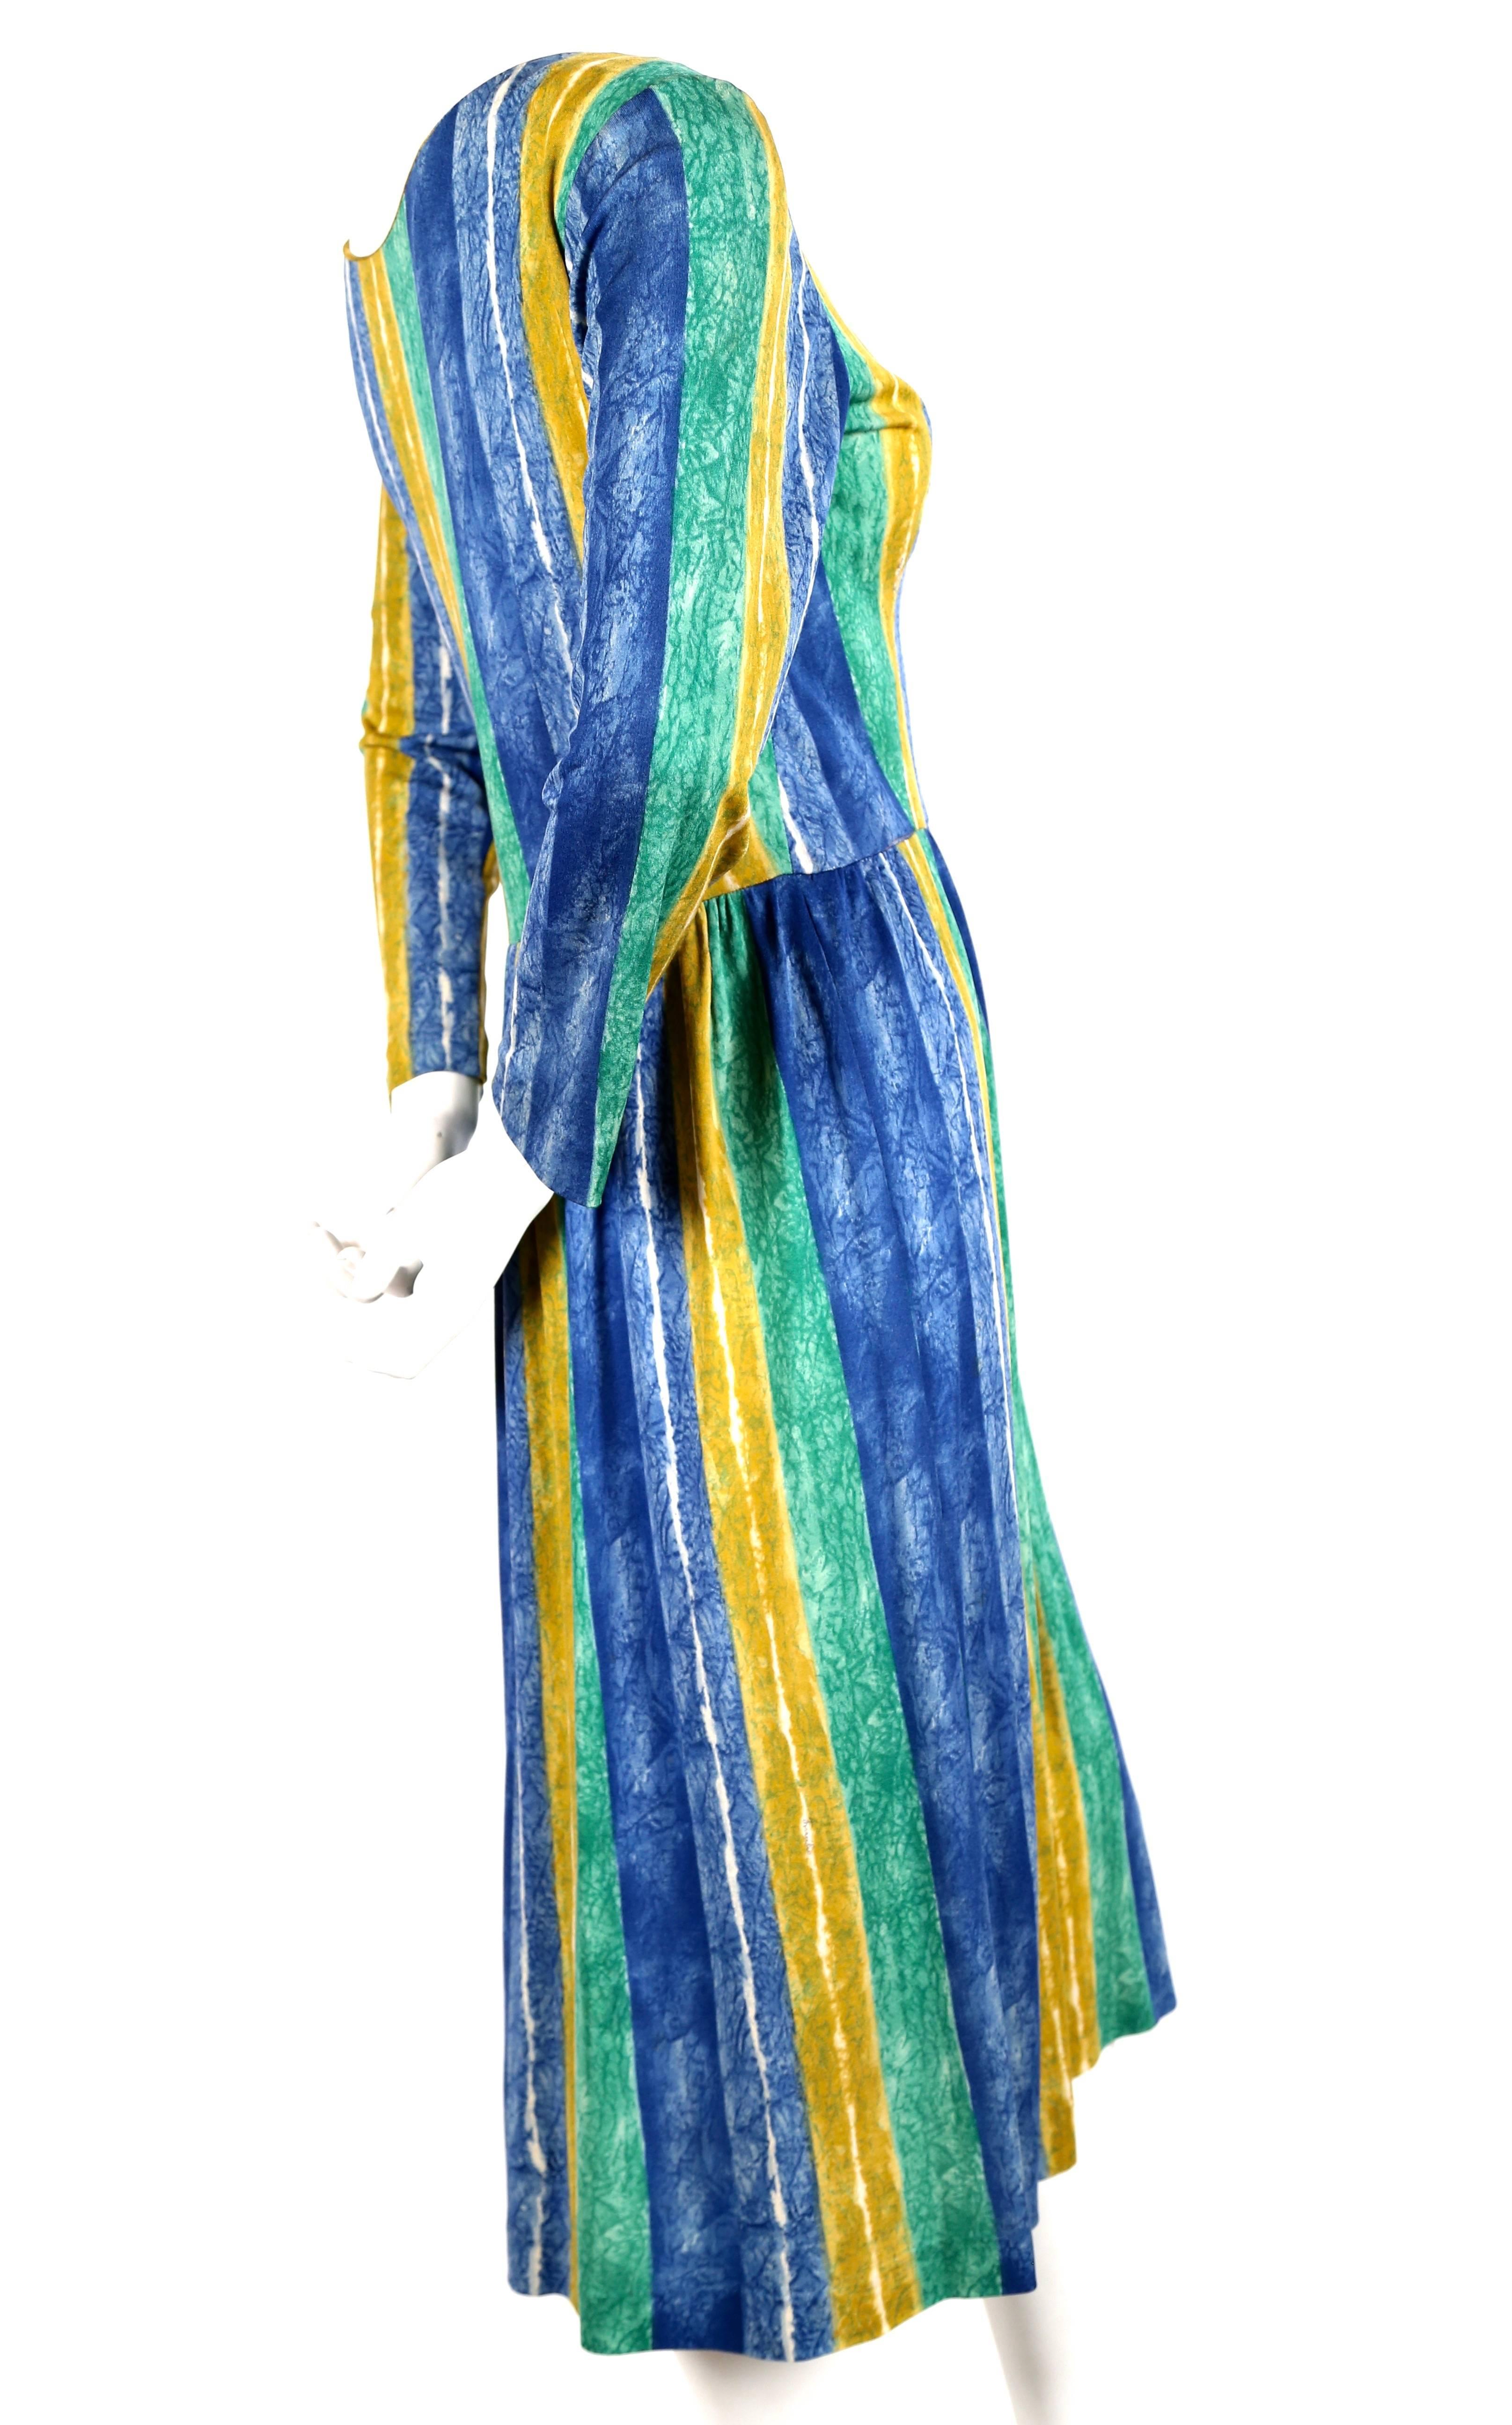 Abstract patterned silk jersey dress from Pucci dating to the 1960's. The colors are very vibrant and include kelly green, azure blue and marigold. Fabric is signed 'PUCCI' in numerous places. Best fits a US 8 or 10. Bust measures approximately 38